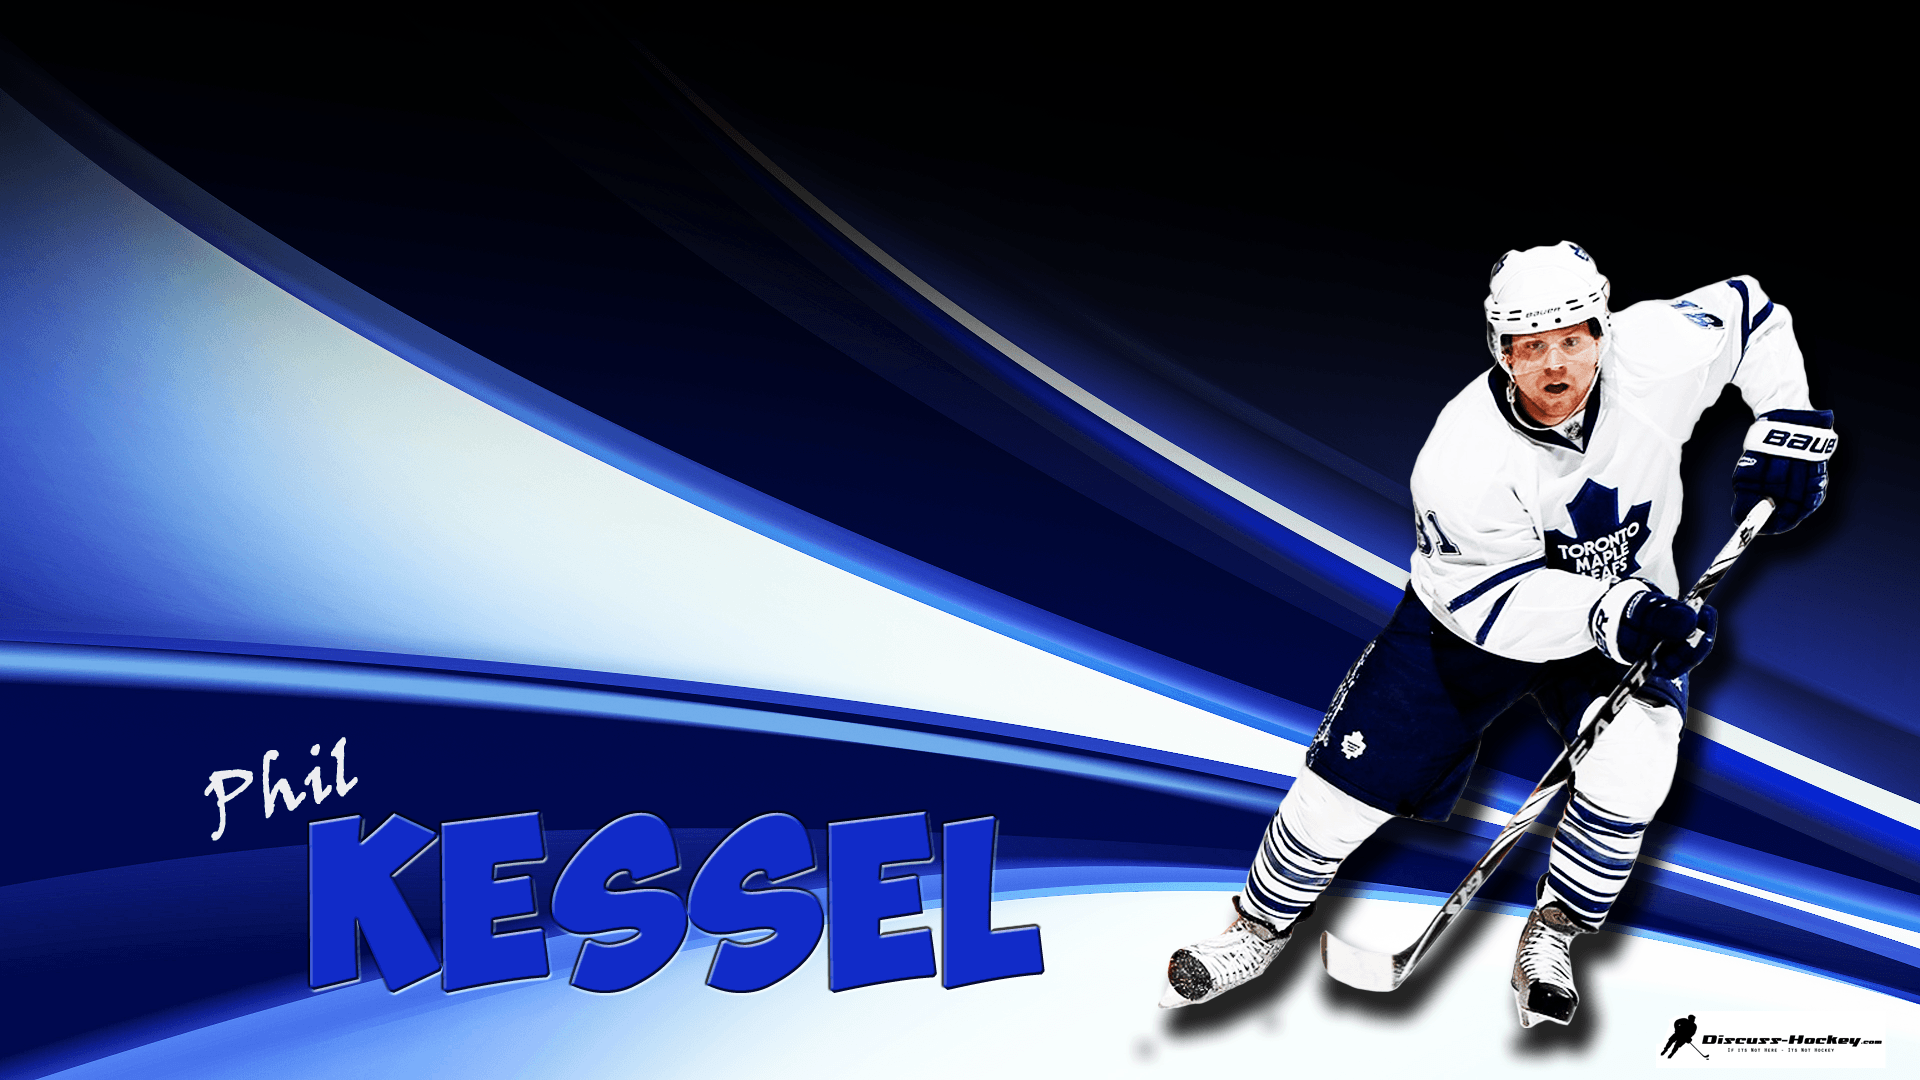 Amazing Hockey player Phil Kessel wallpapers and image